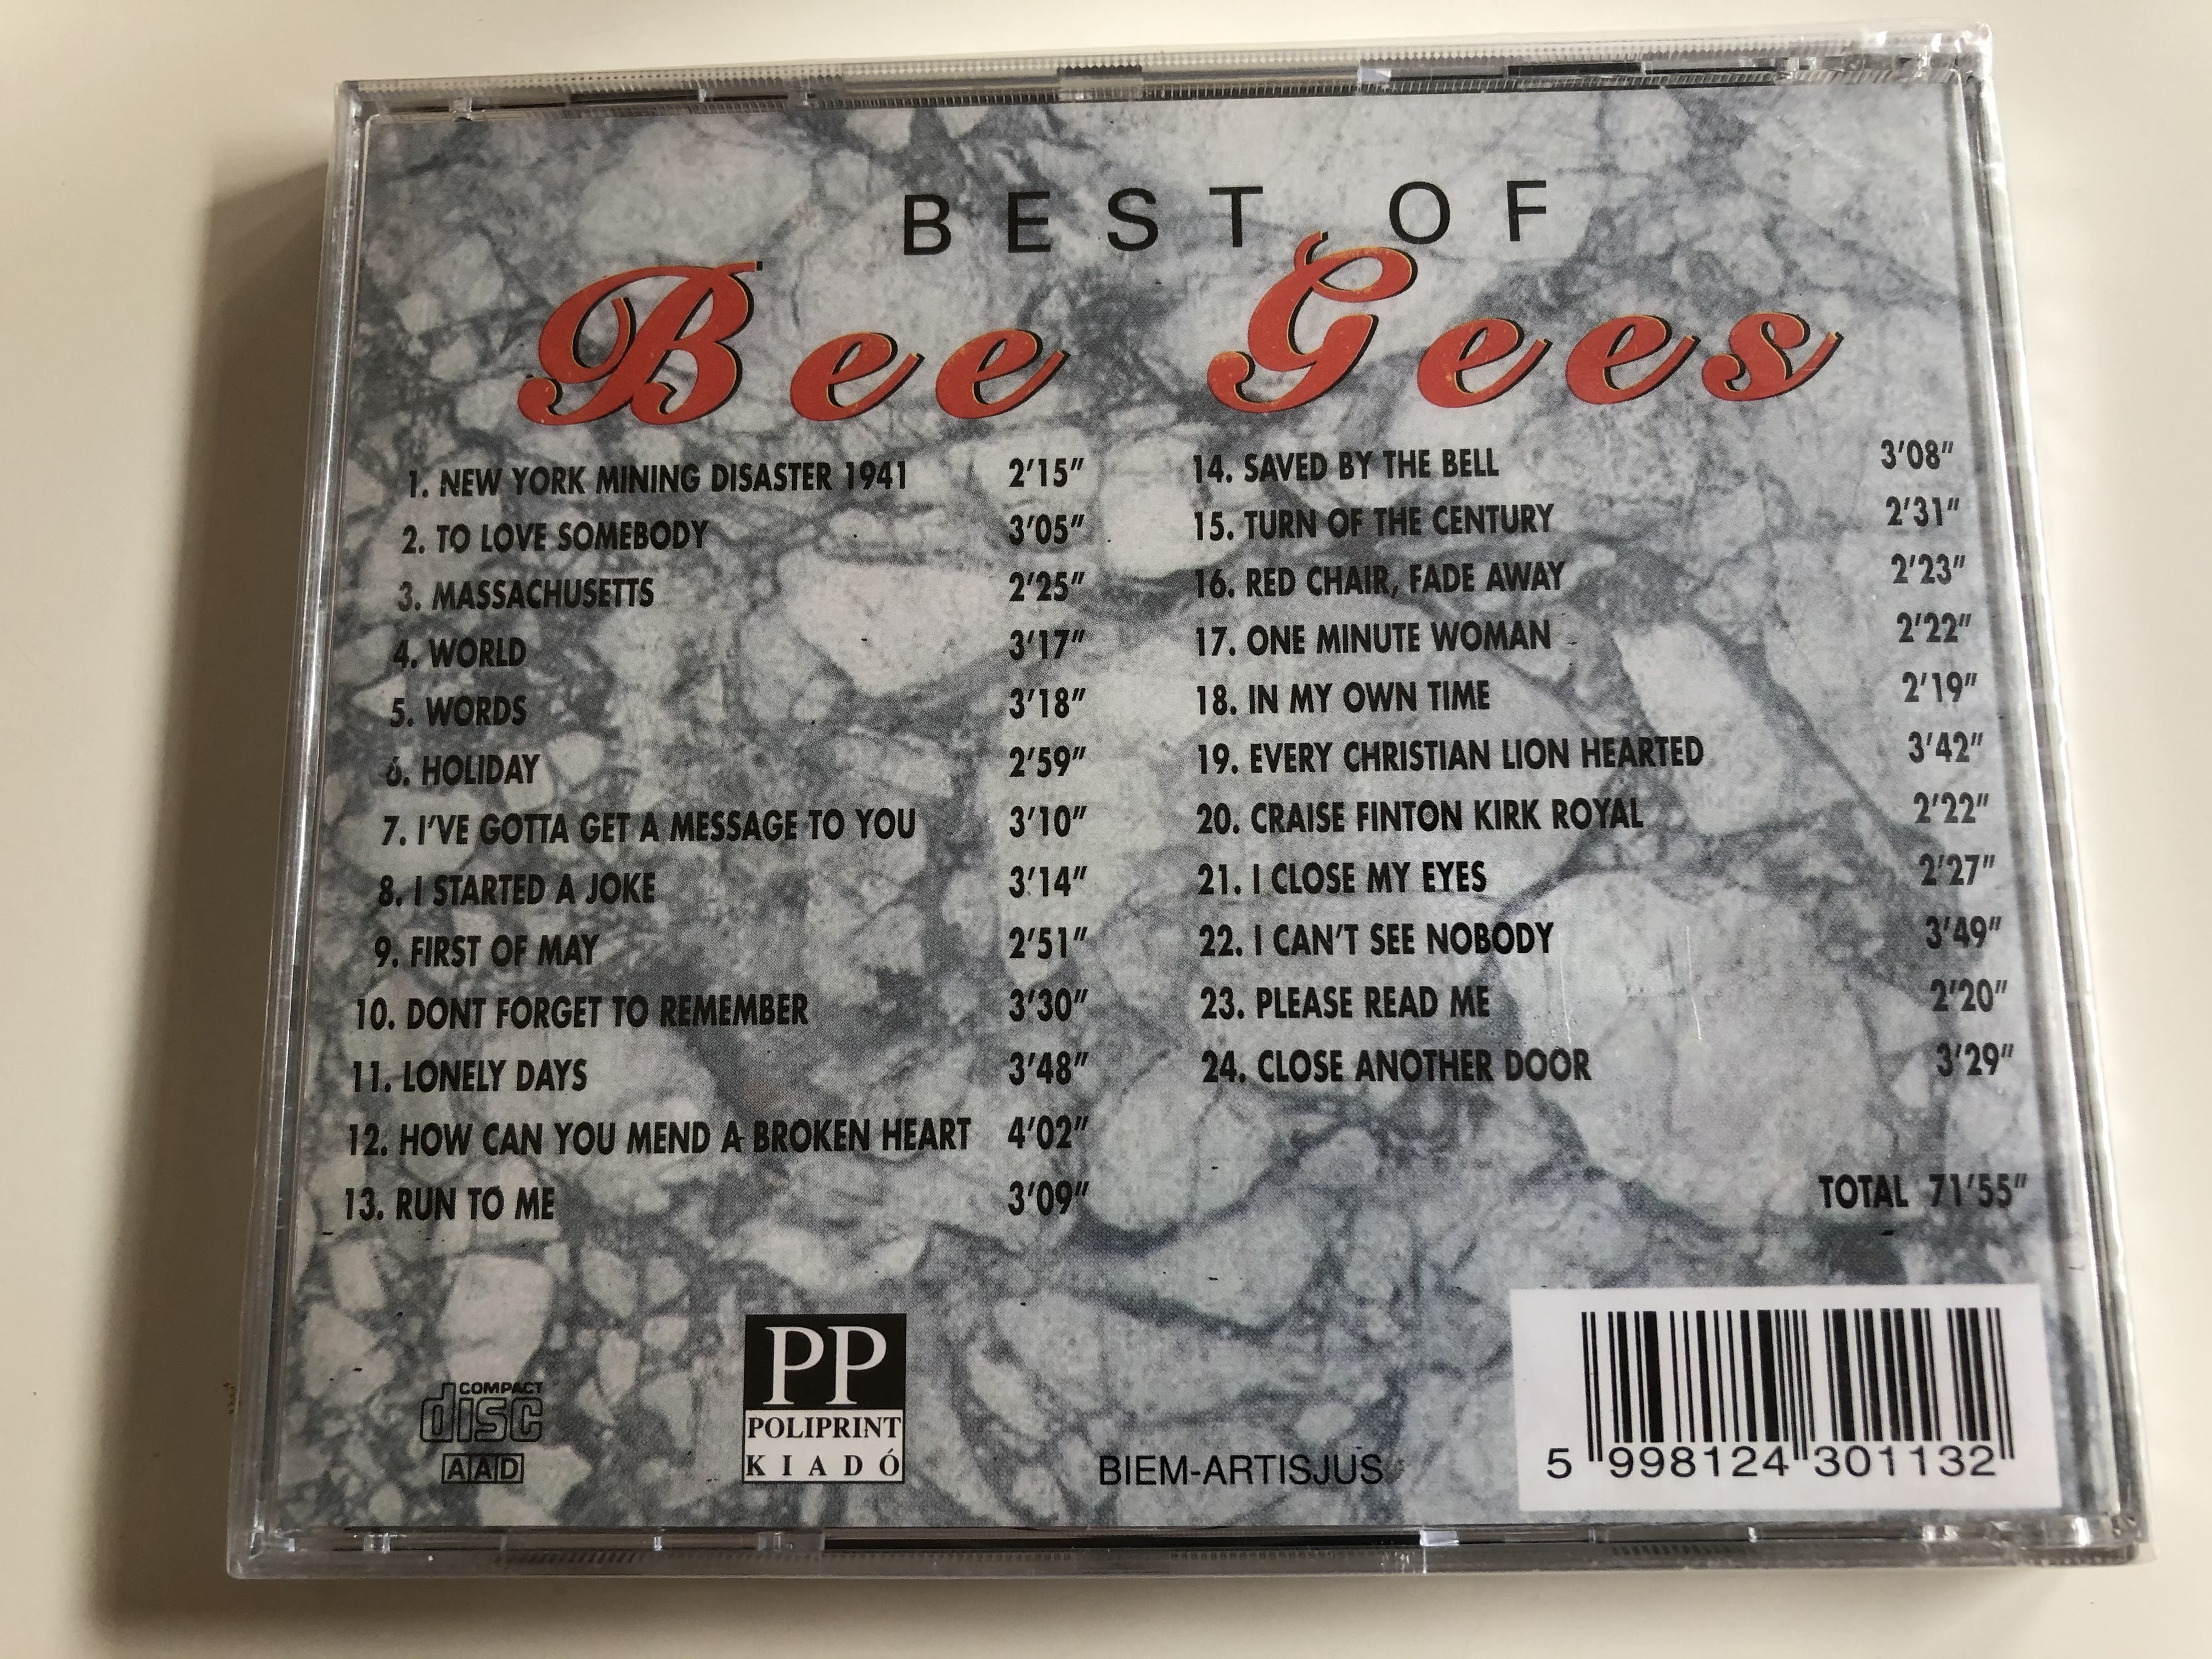 best-of-bee-gees-gold-collection-poliprint-kiad-audio-cd-ppcd-113-2-.jpg